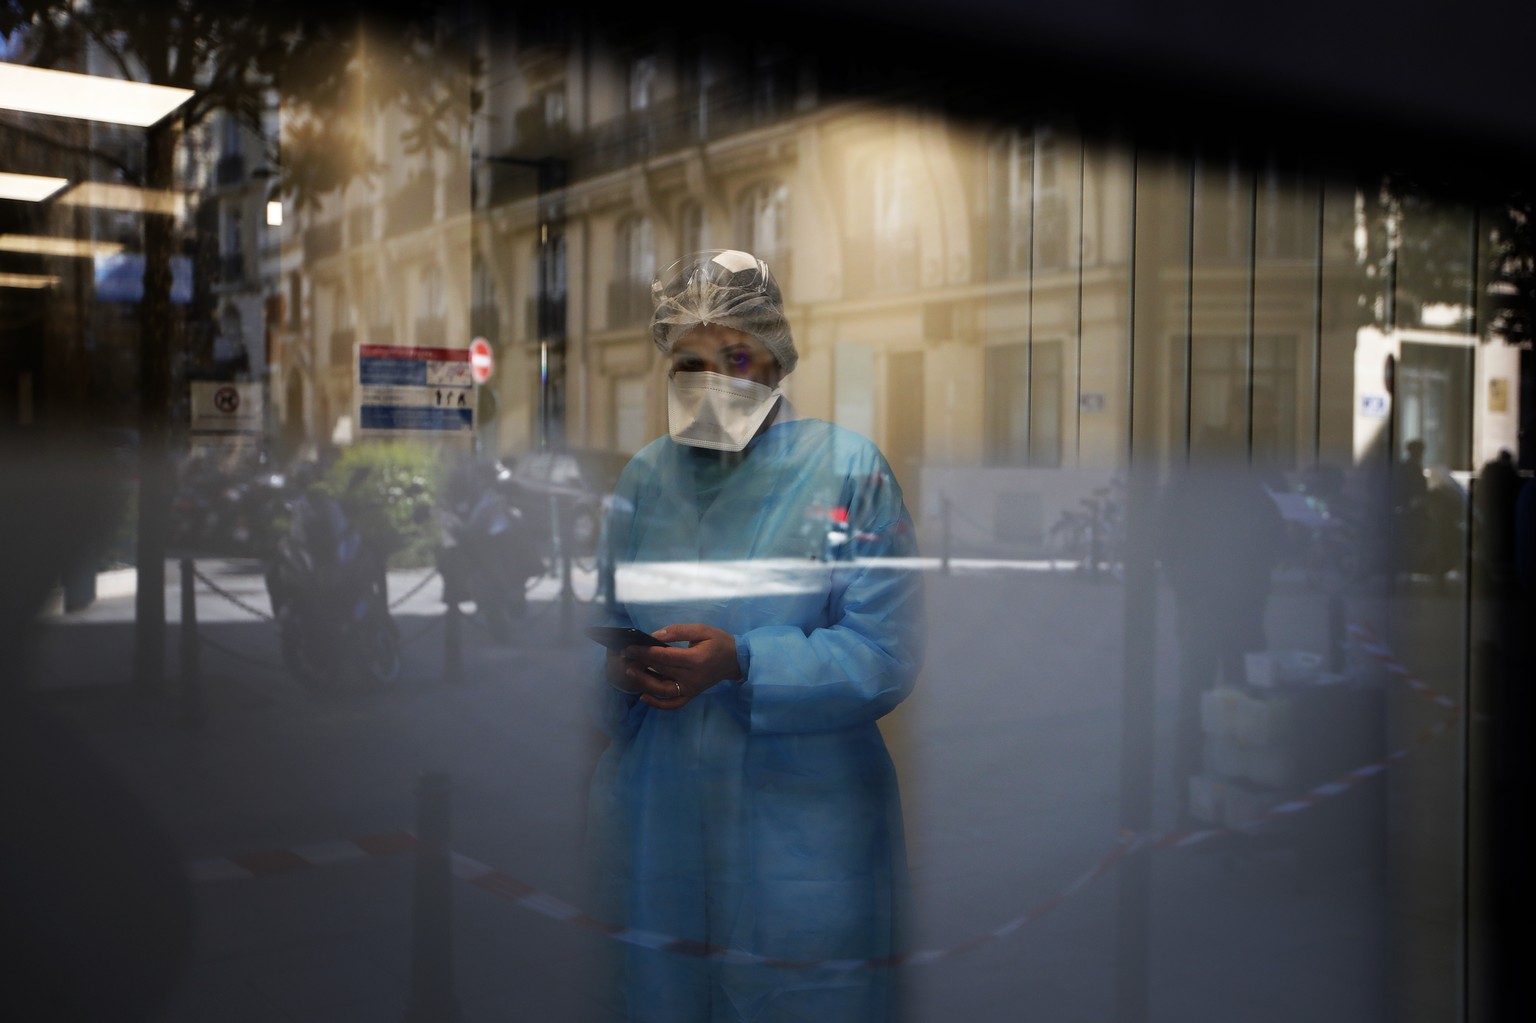 Biologist doctor Caroline Gutsmuth gives a phone call in medical biology laboratory who opened a coronavirus drive-thru testing site, in Neuilly-sur-Seine, near Paris, March 23, 2020. (AP Photo/Christ ...